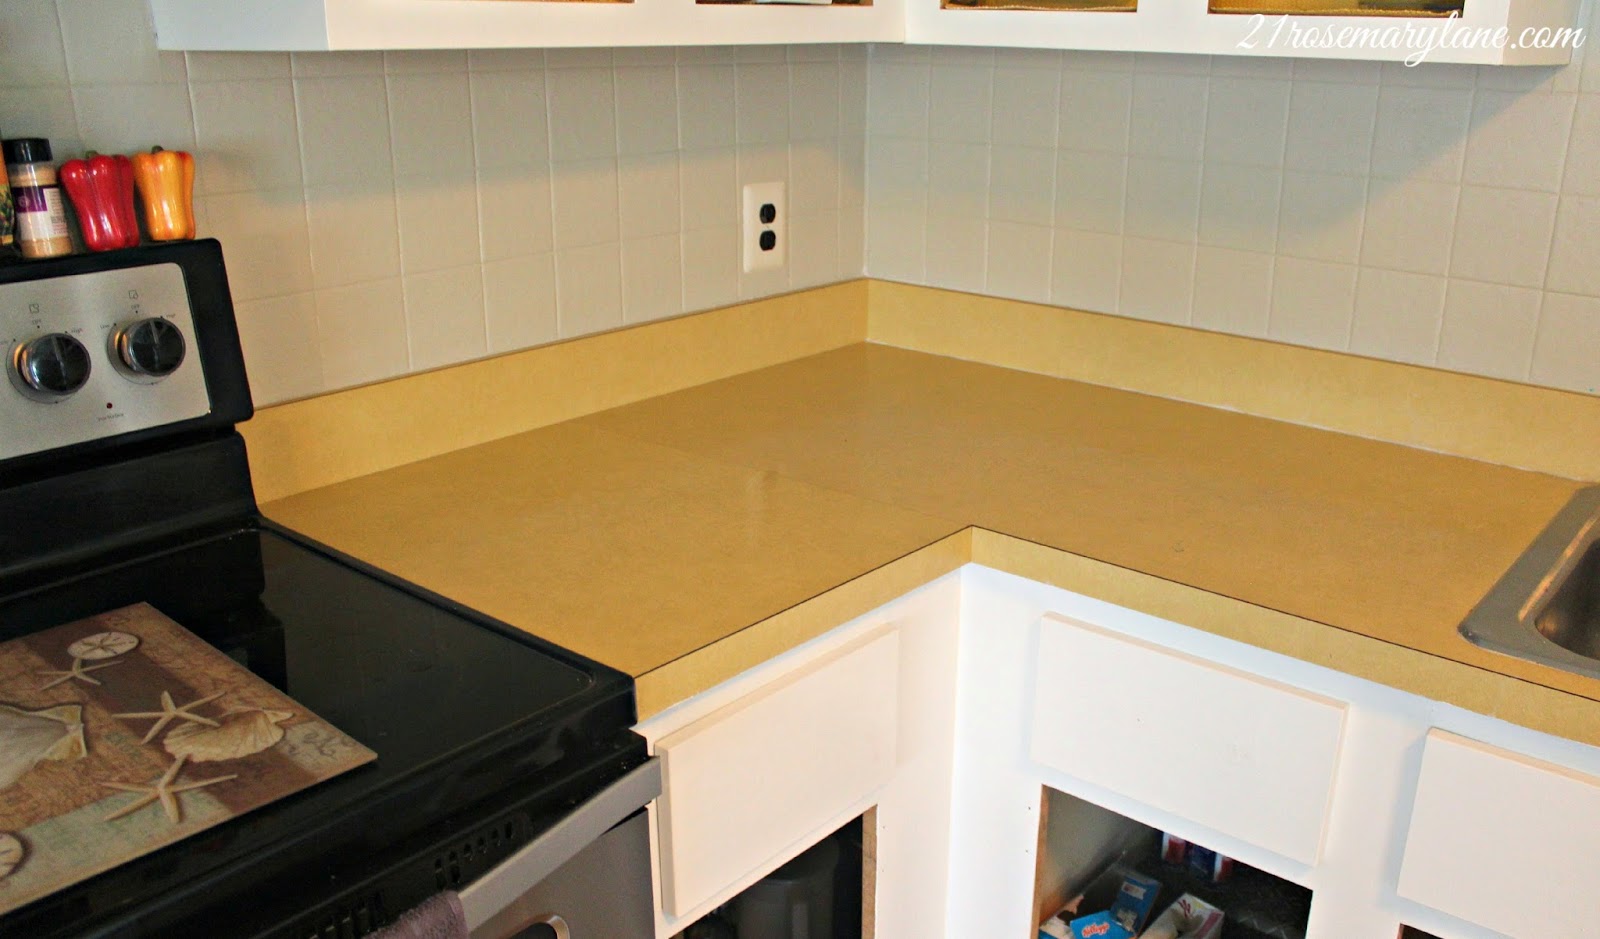 How to Make Laminate Countertops Look Like Wood For Less Than $100.00 —  SHEEP SHOP